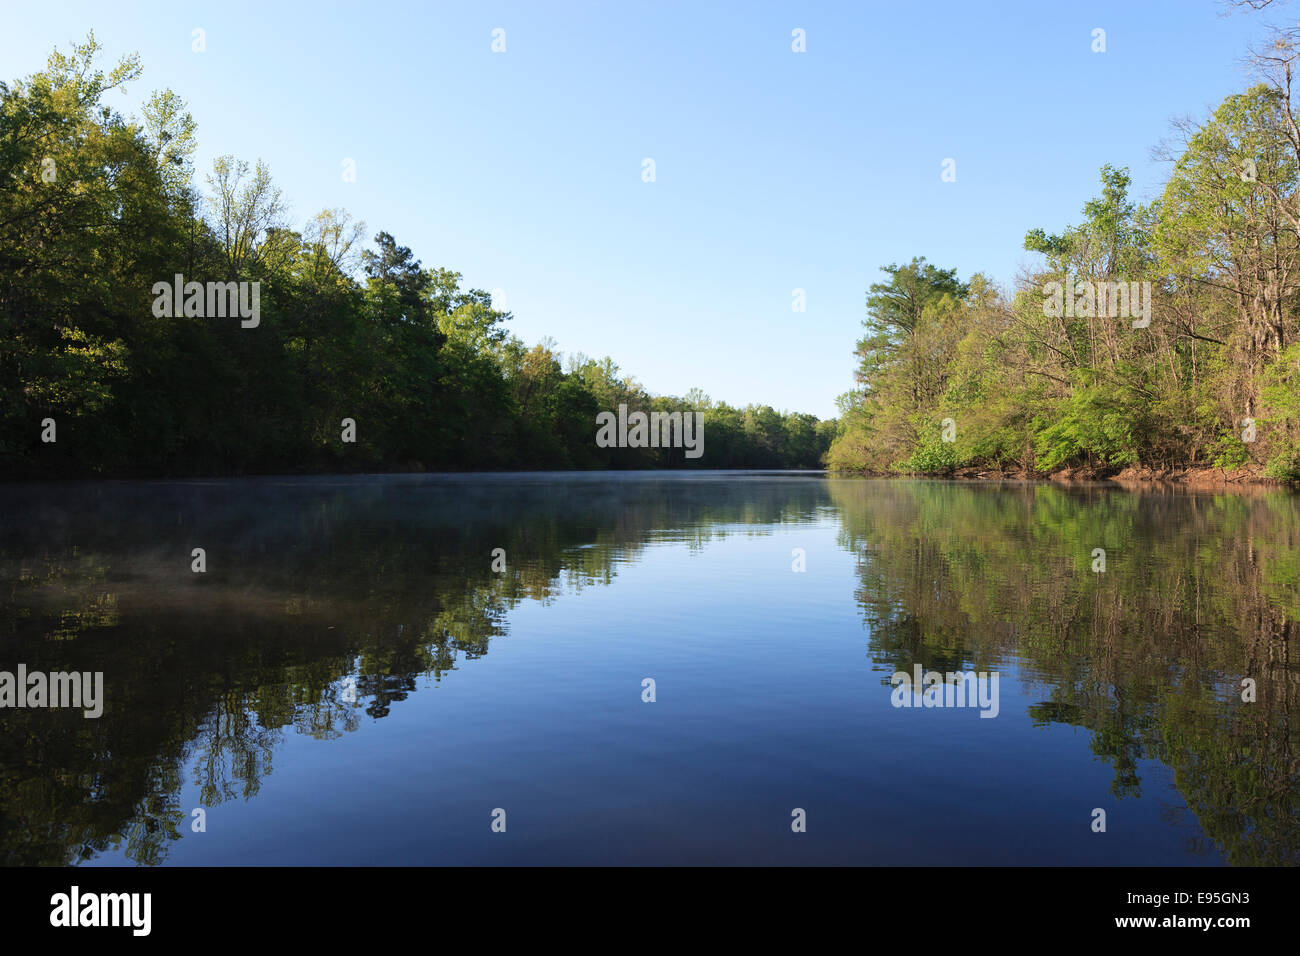 Bates Old River with greening vegetation in spring.  Congaree National Park, South Carolina, spring. Stock Photo